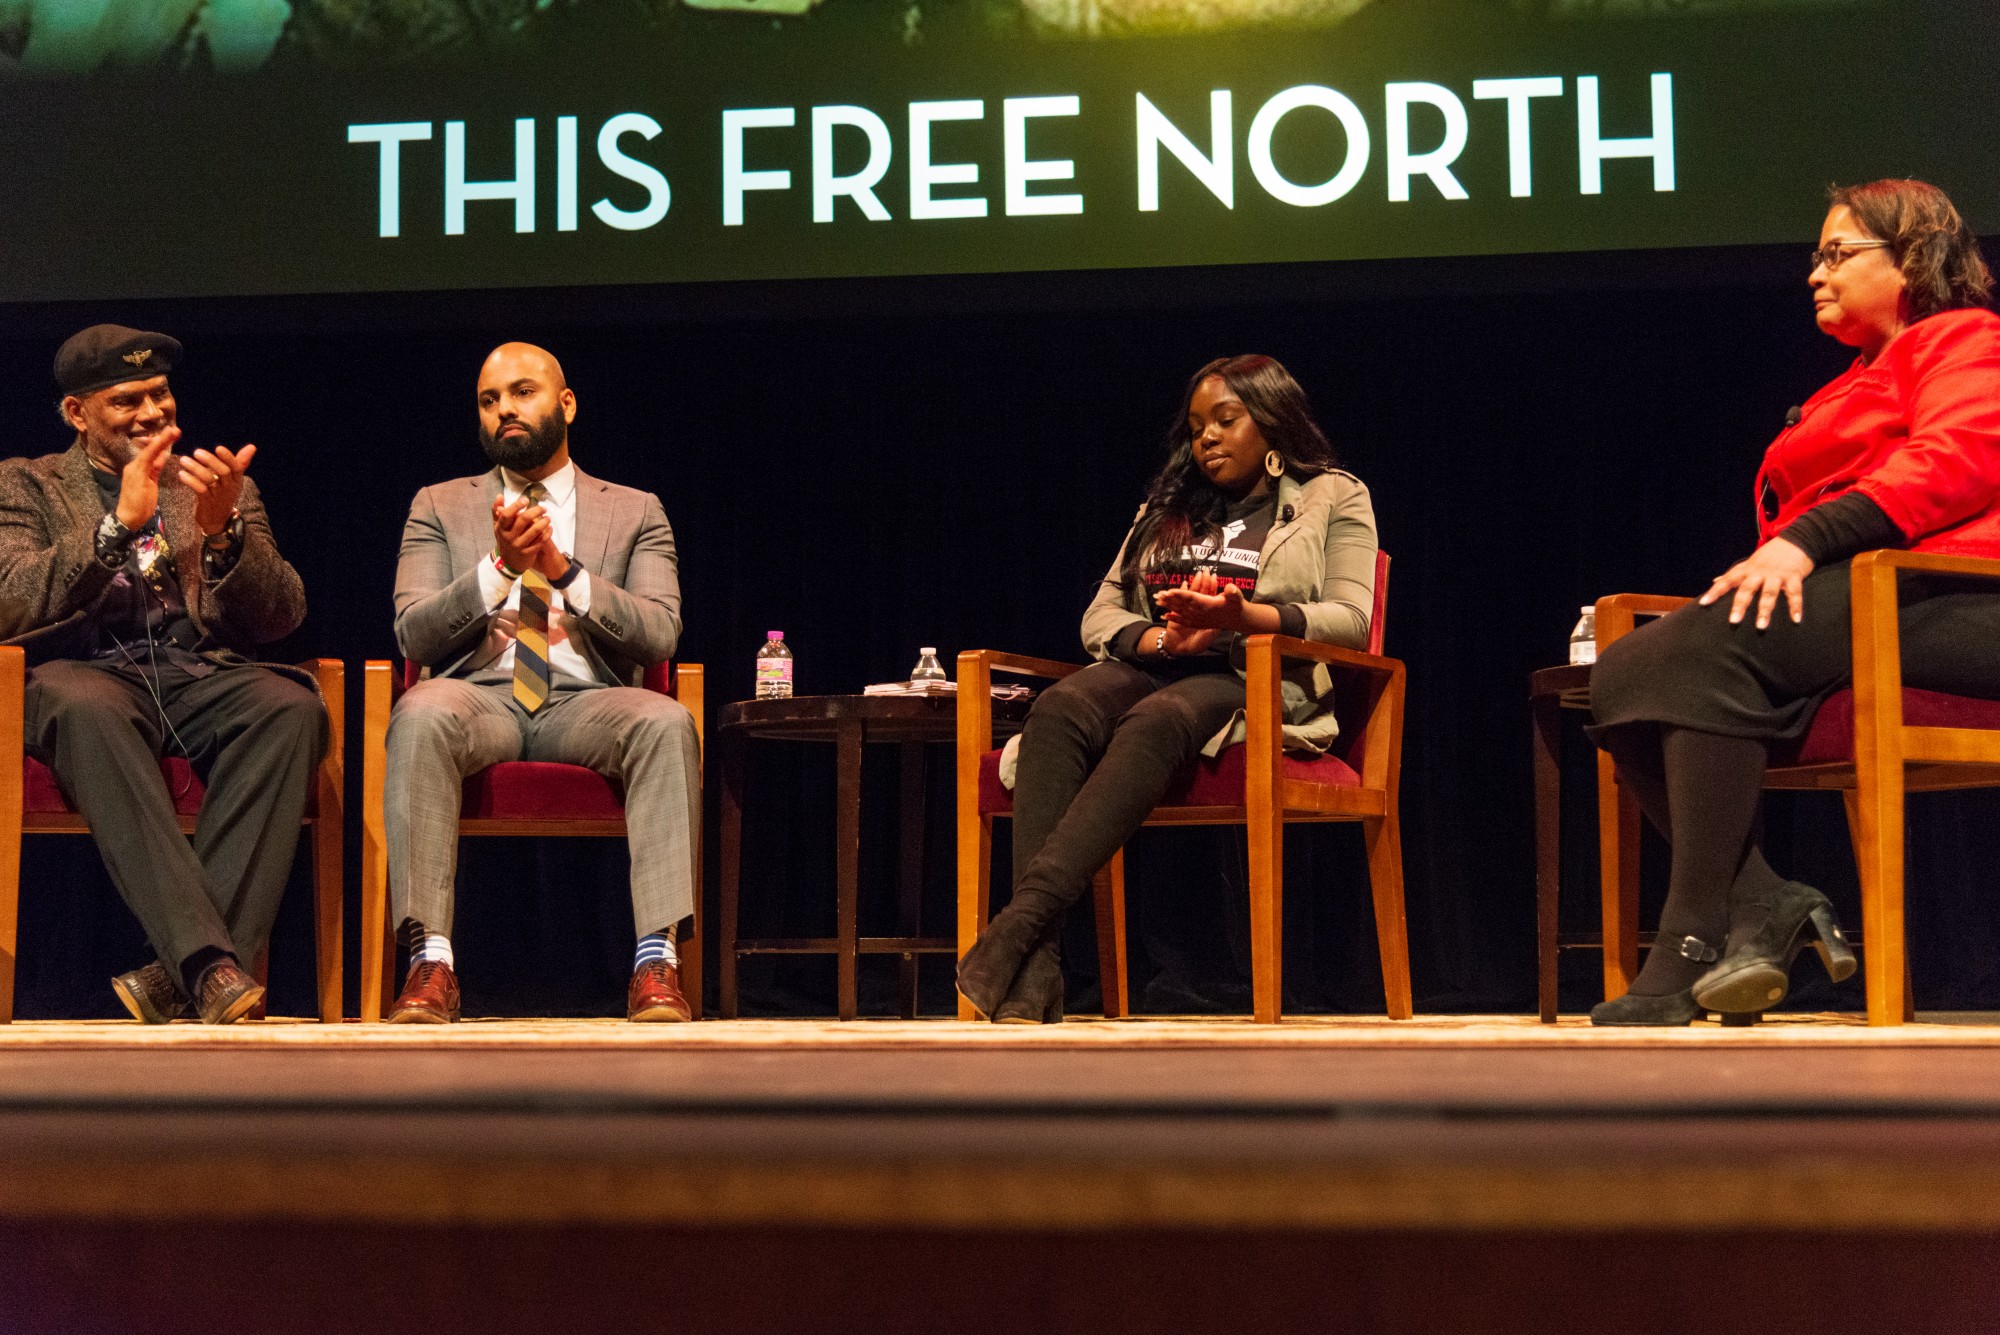 Panelists, from left, John Wright, Abdul Omari, Sharon Ogata, and Makeda Zulu-Gillespie discuss the “This Free North” documentary at Northrop Auditorium on Tuesday, Feb. 18. The event included a documentary premiere and a discussion about black history at the University of Minnesota.